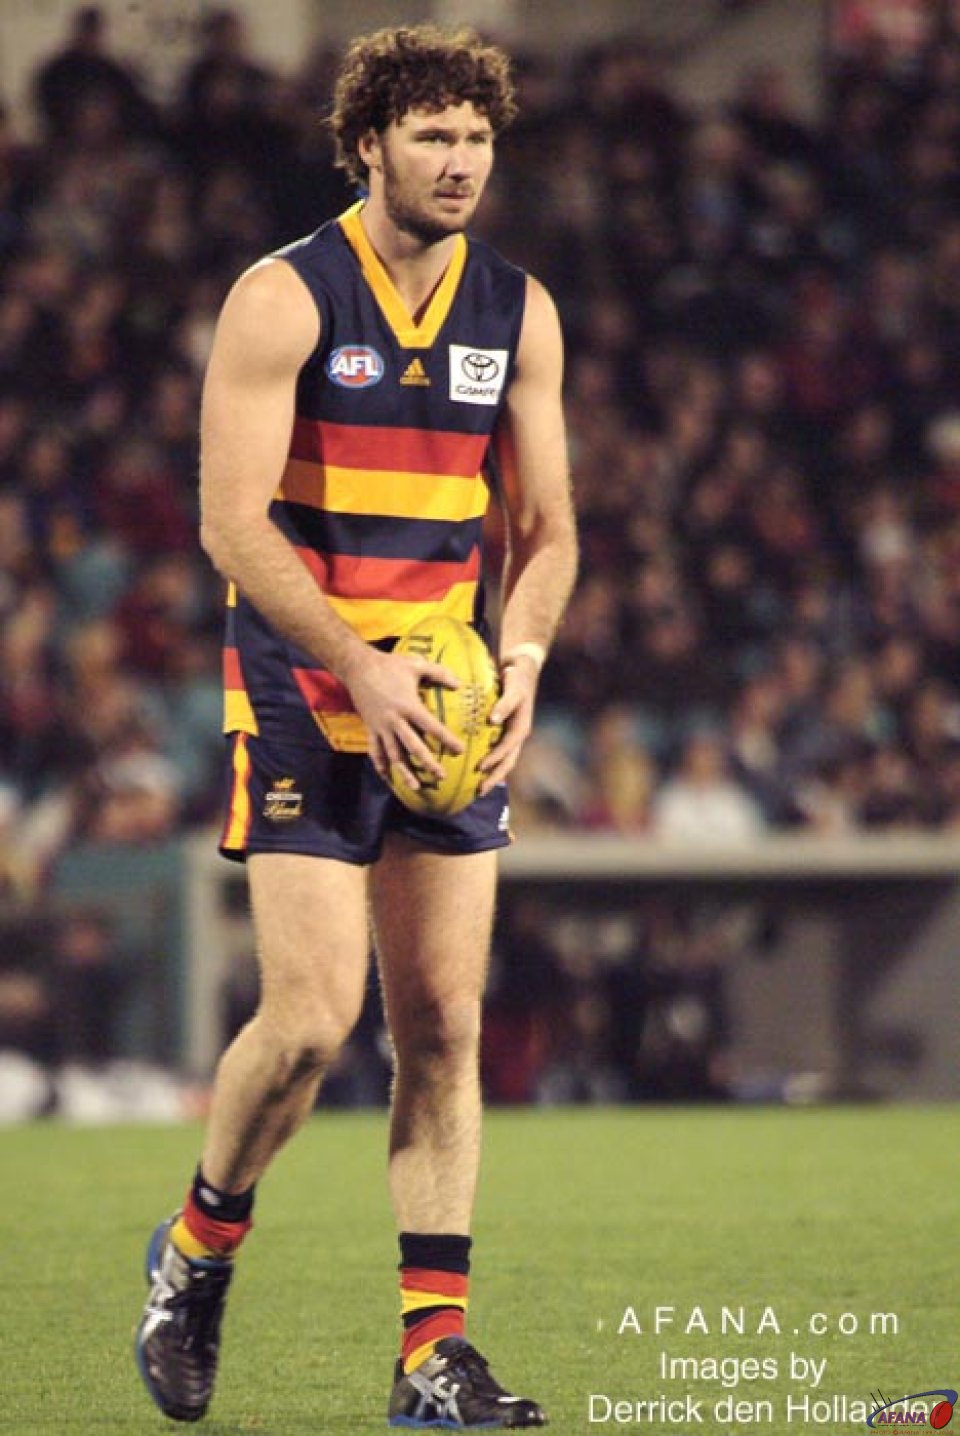 [b]Adelaide Crows Ken McGregor warms up prior to the game[/b]